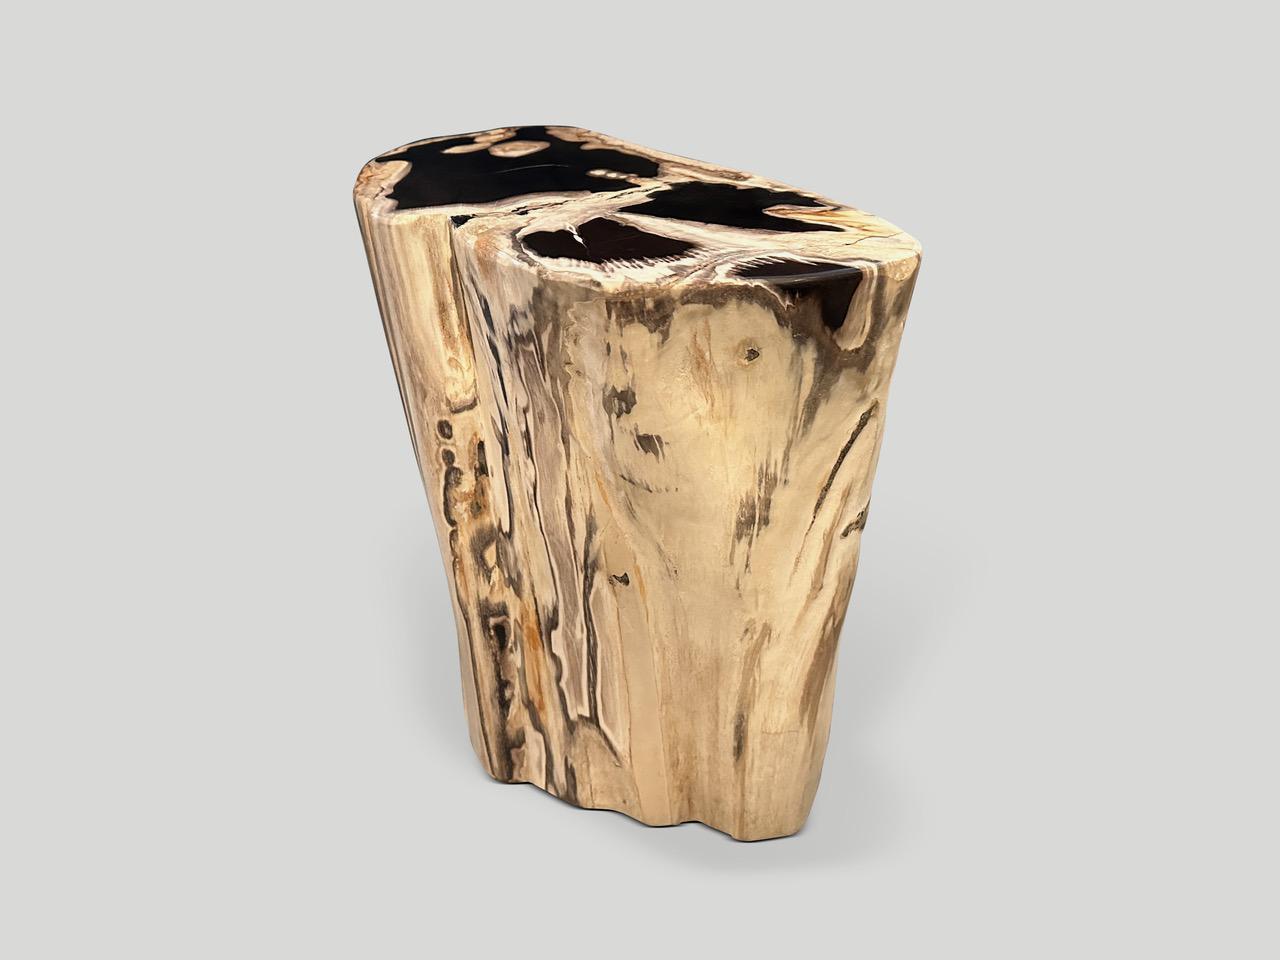 Impressive beautiful contrasting tones on this high quality petrified wood side table. It’s fascinating how Mother Nature produces these stunning 40 million year old petrified teak logs with such contrasting colors and natural patterns throughout.